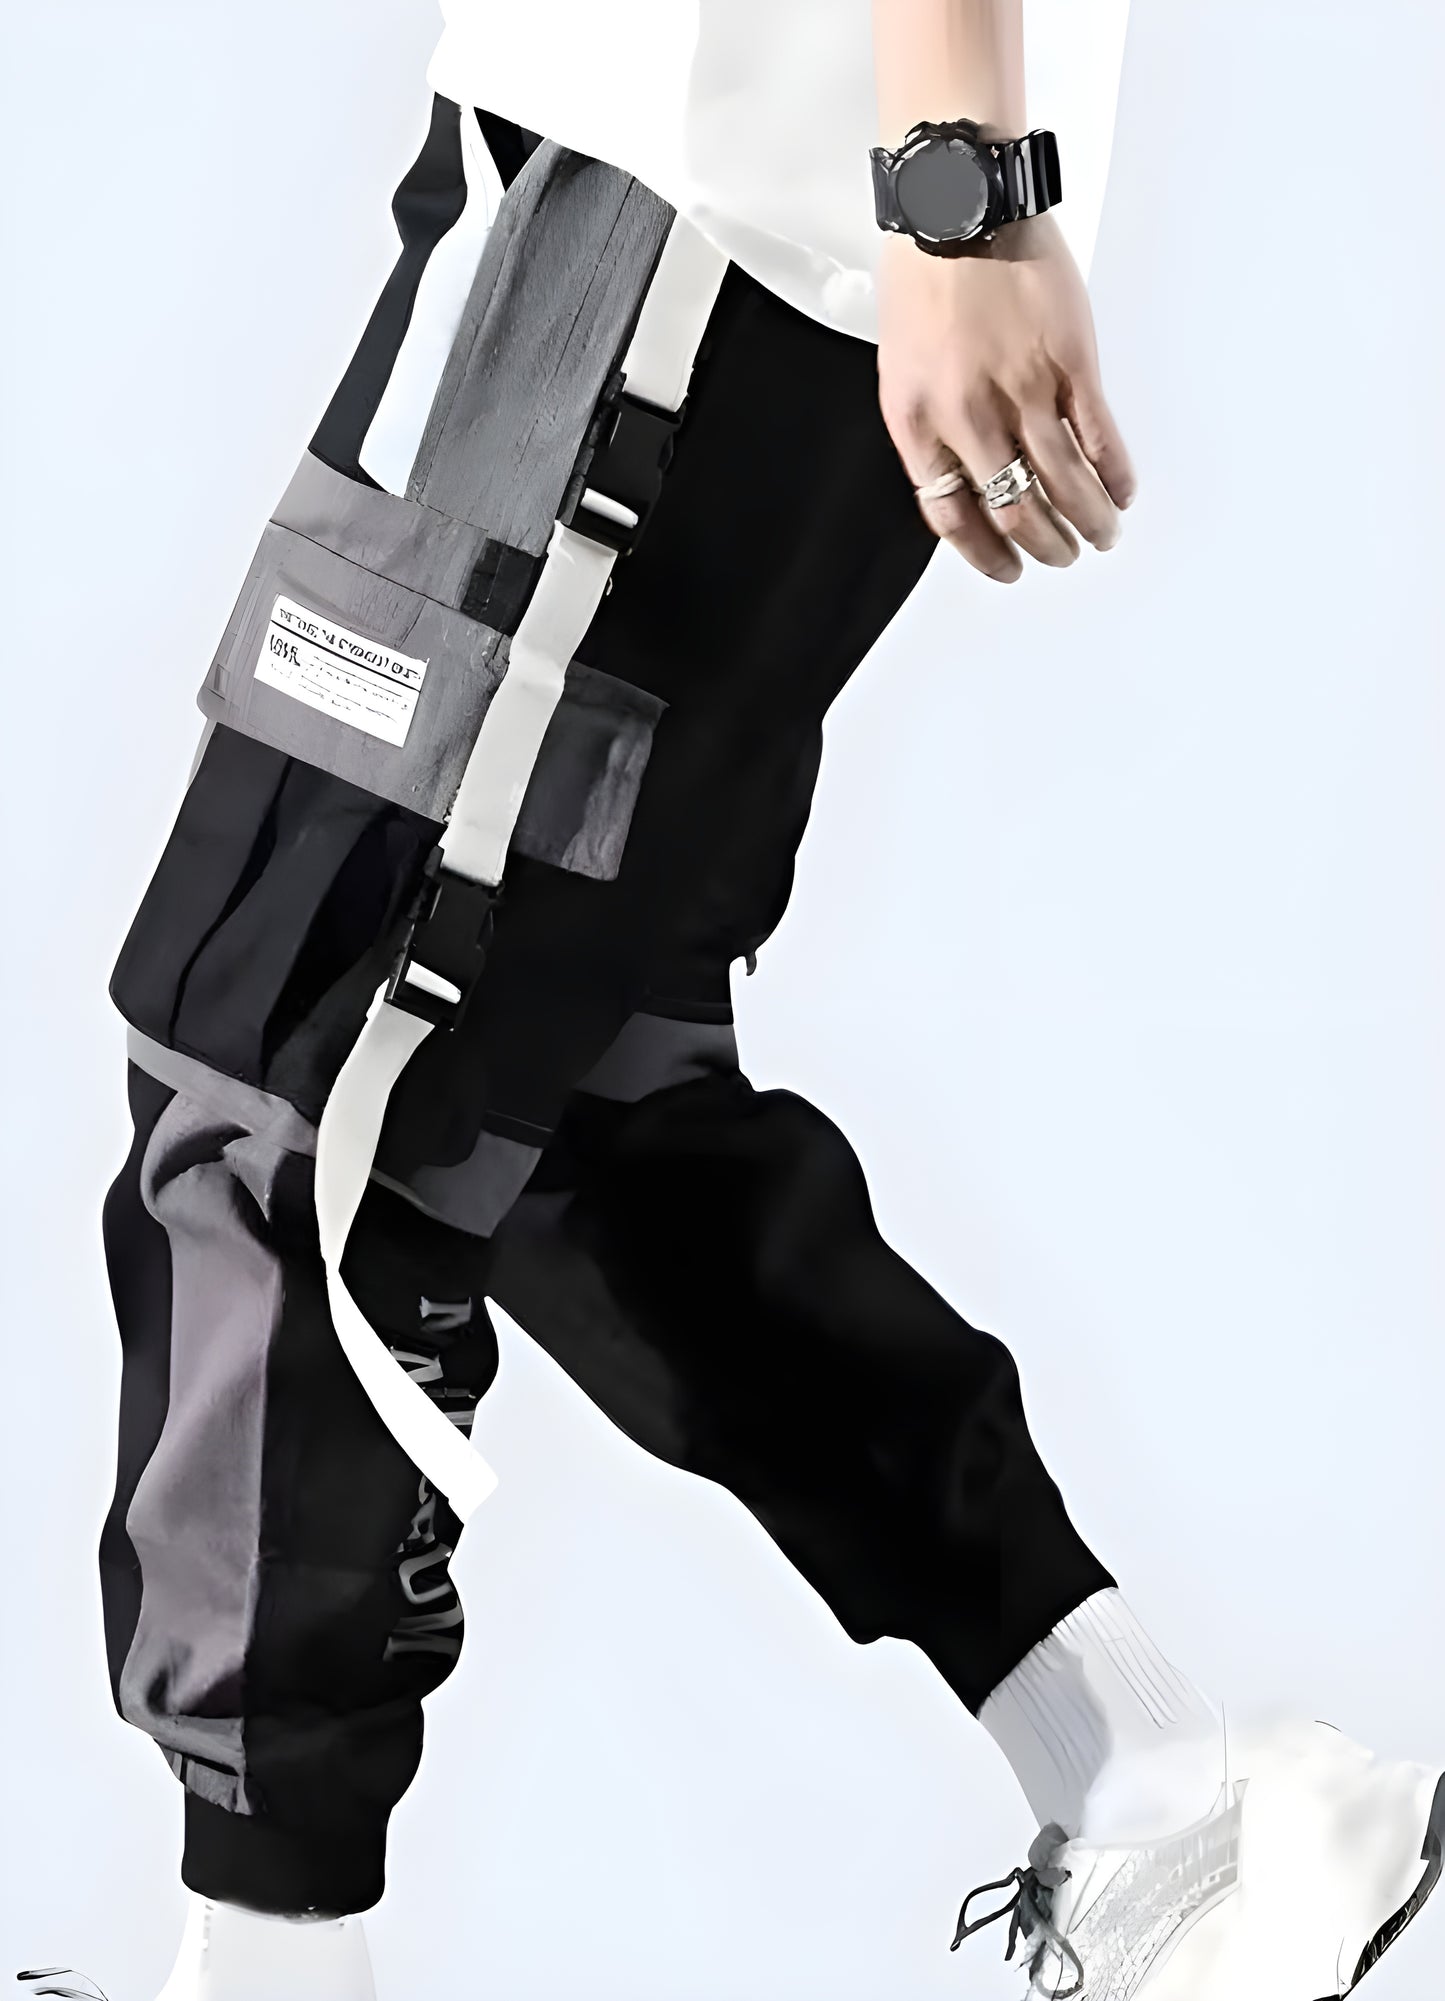 Black techwear pants express your unique designed for boundary-pushing style.